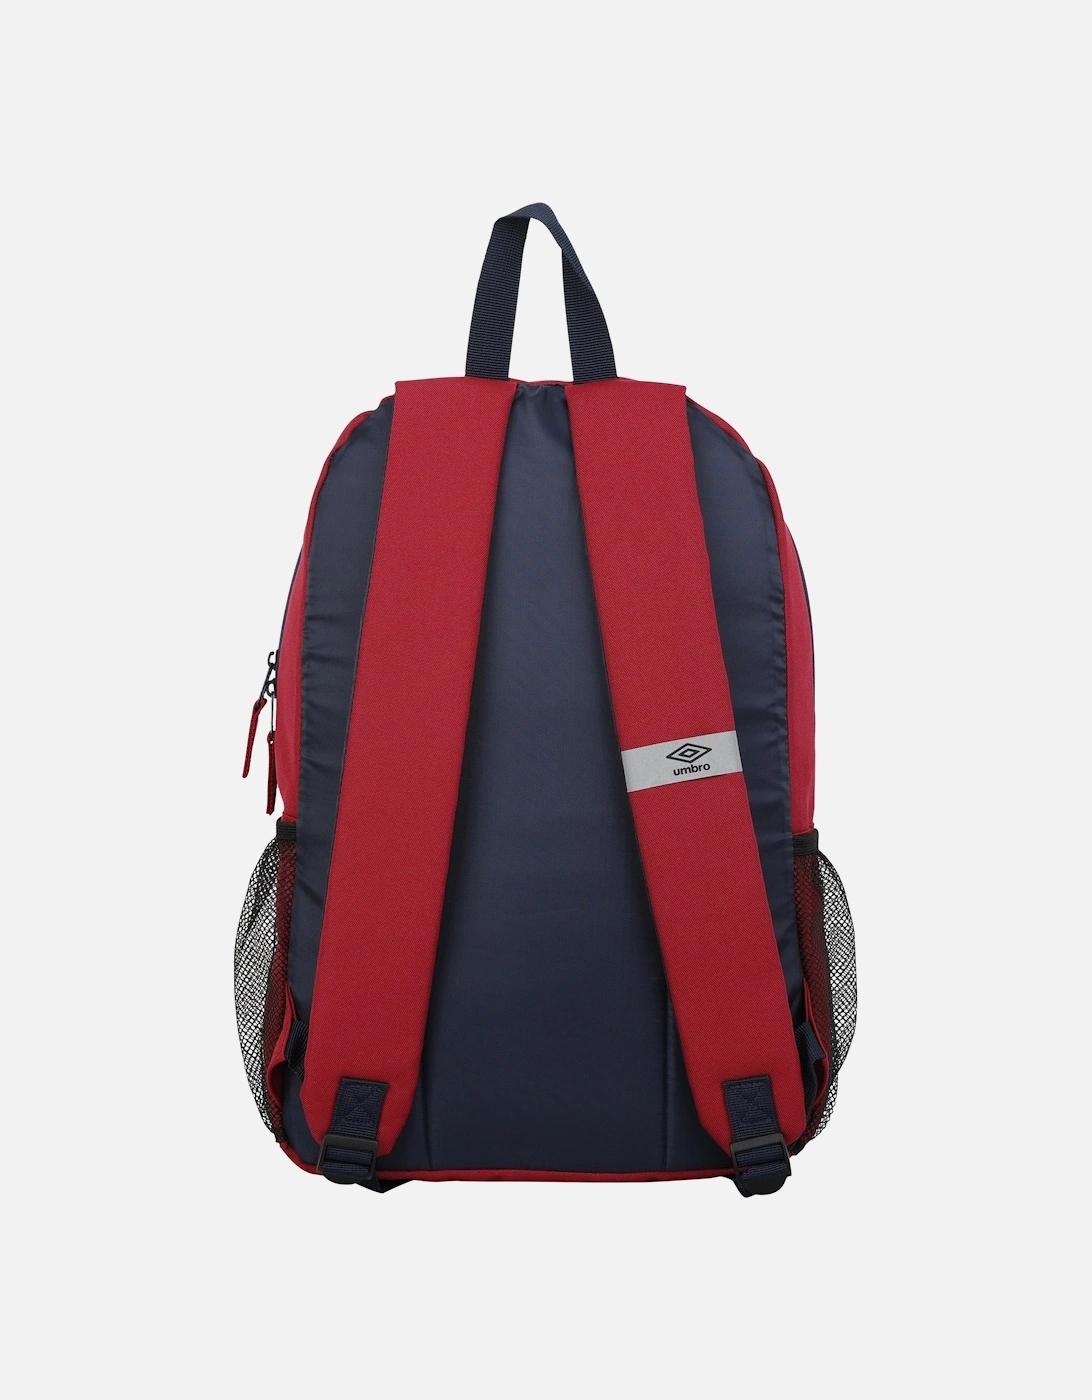 23/24 England Rugby Backpack